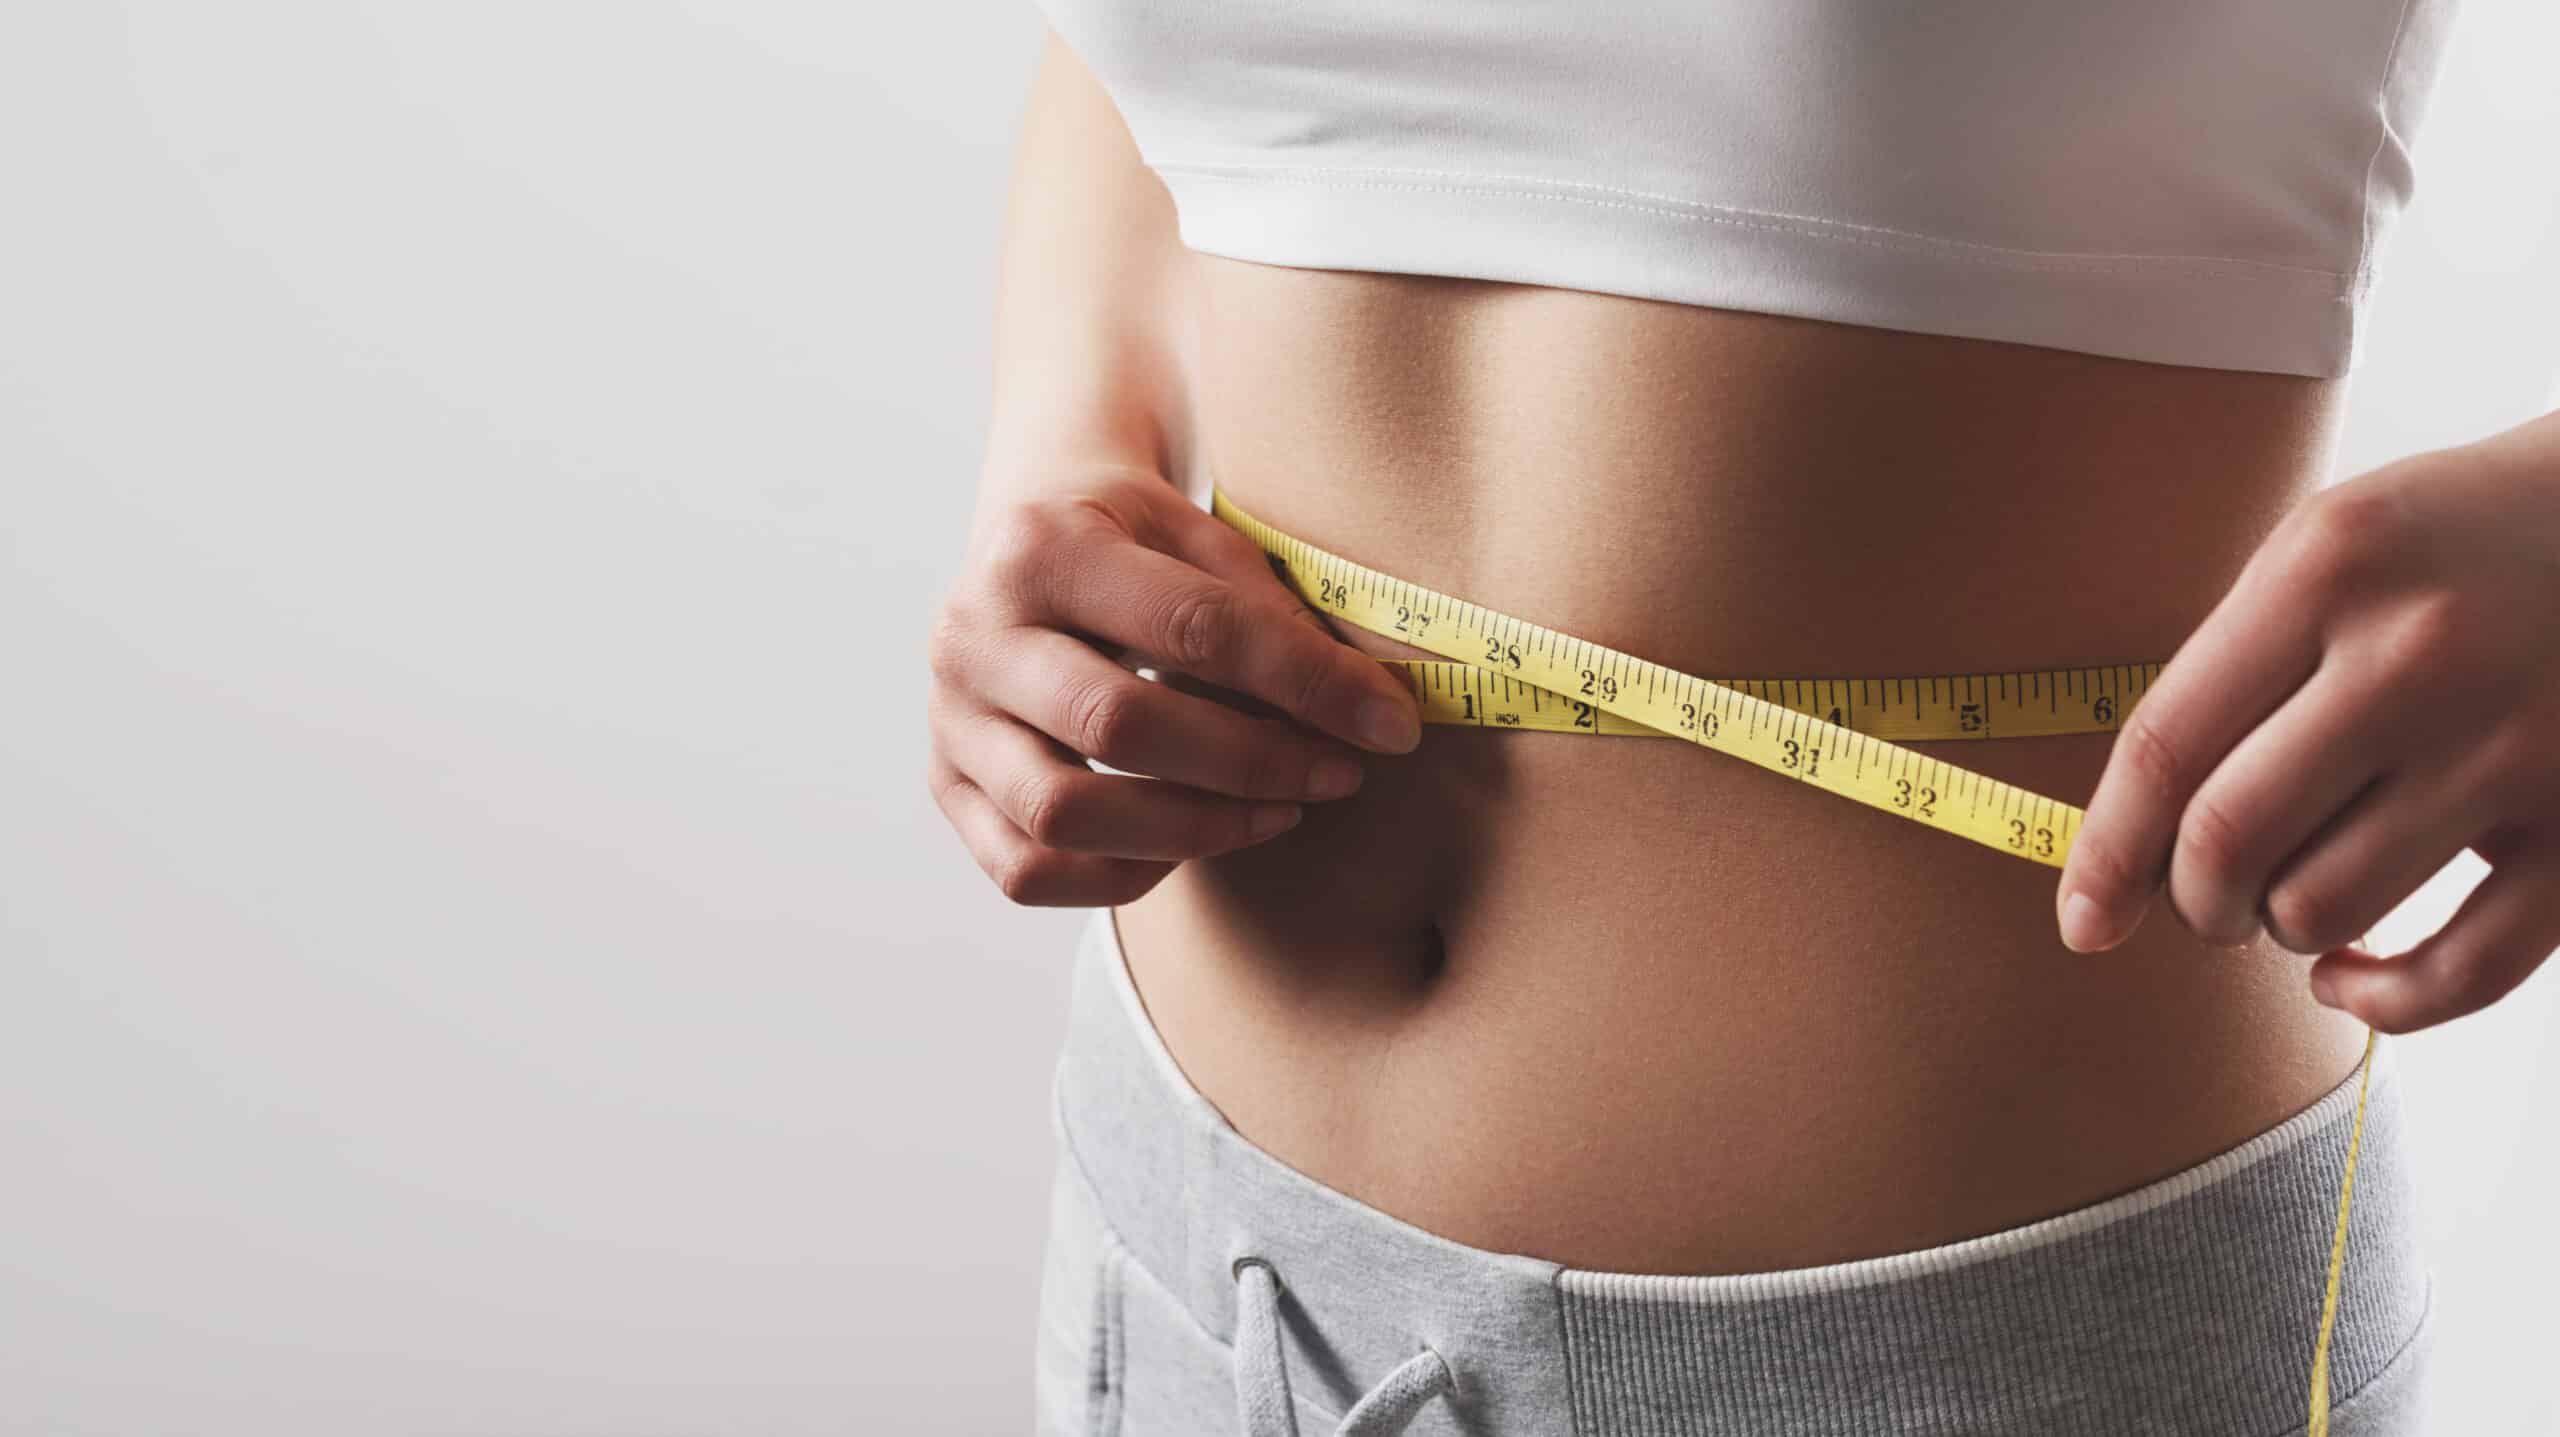 Survey Shows How Small a 22 Inch Waist REALLY Is